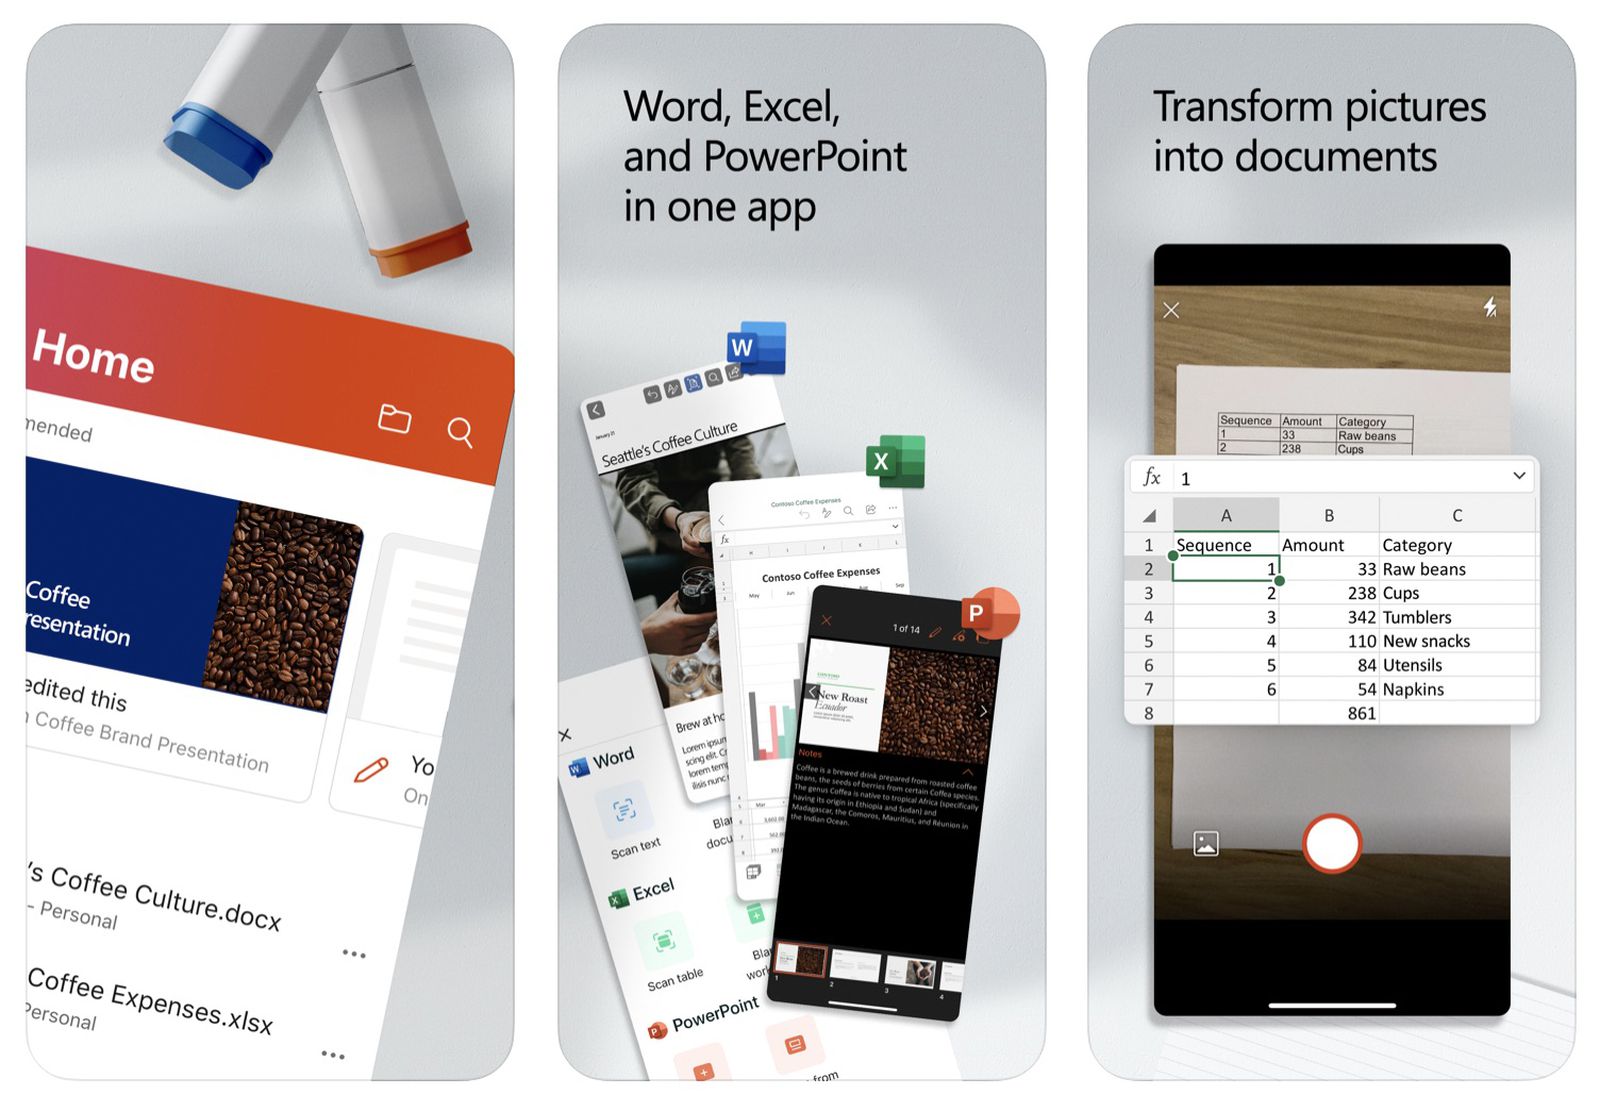 where do you get office suite pro app